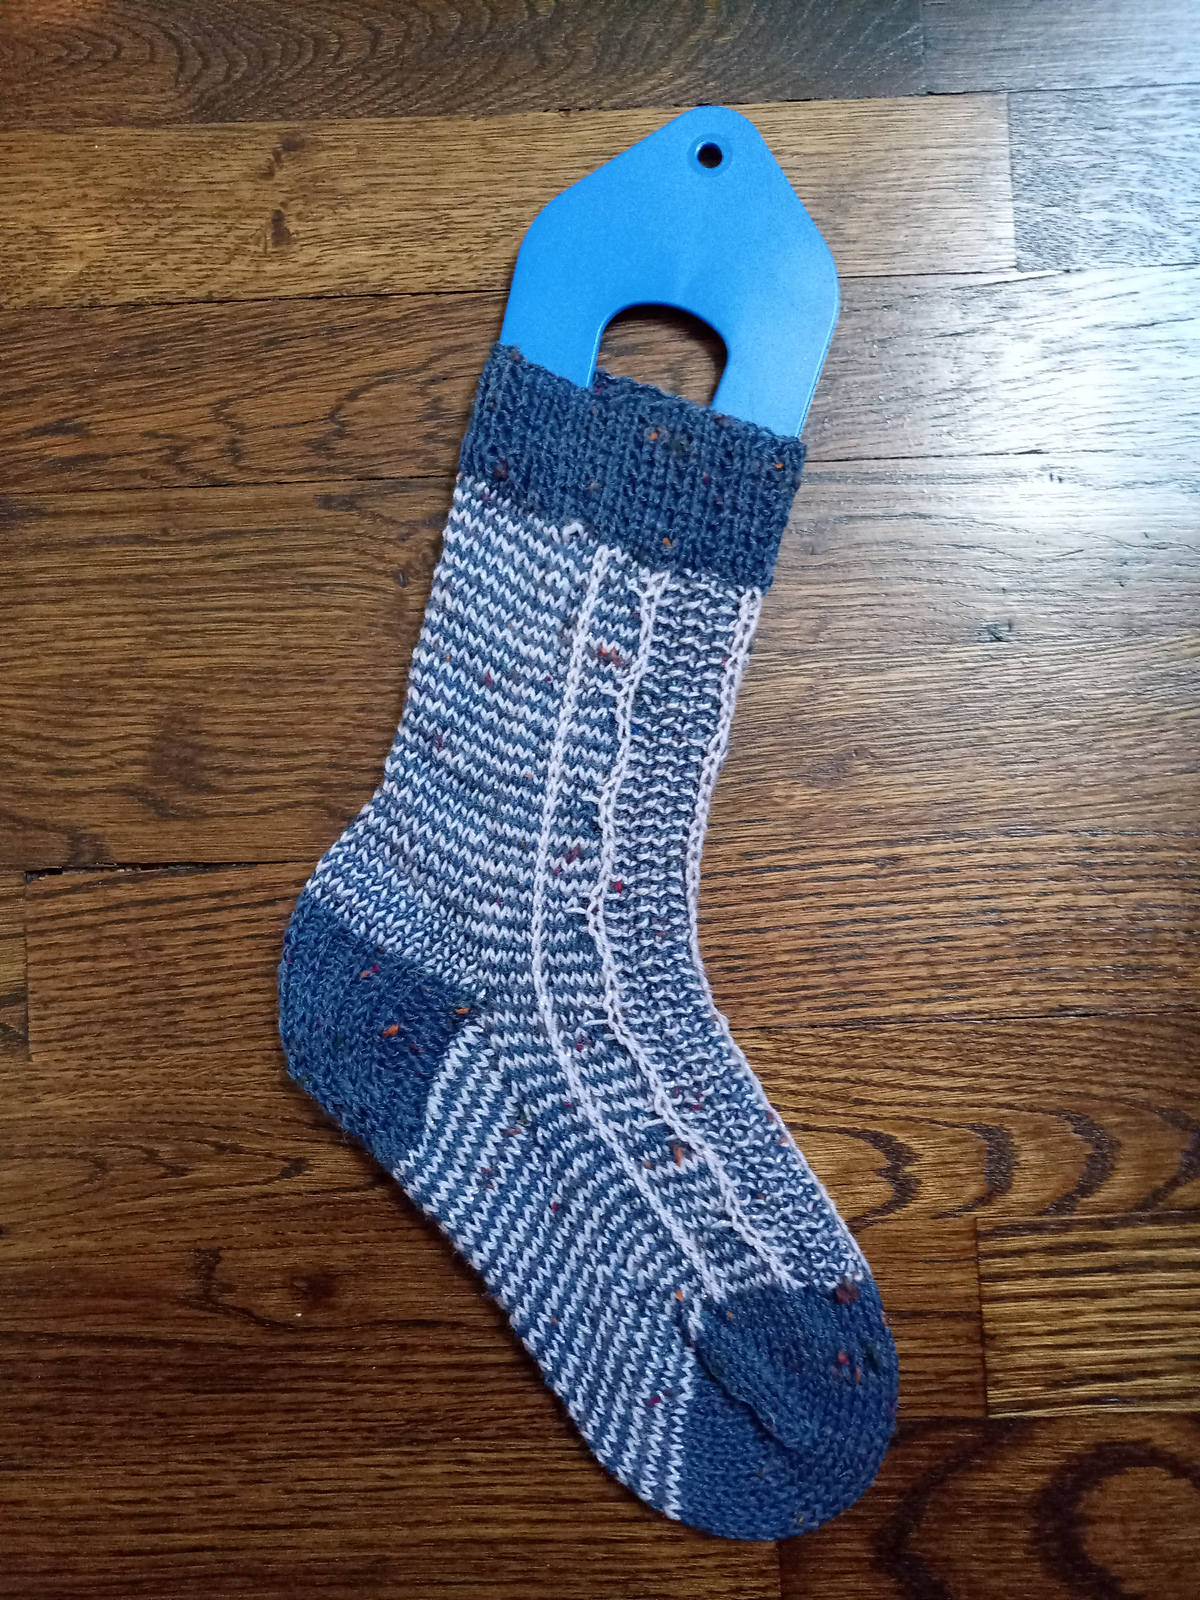  A single sock knit with blue and white yarn in a textured striped and slipped stitch pattern lies on the floor